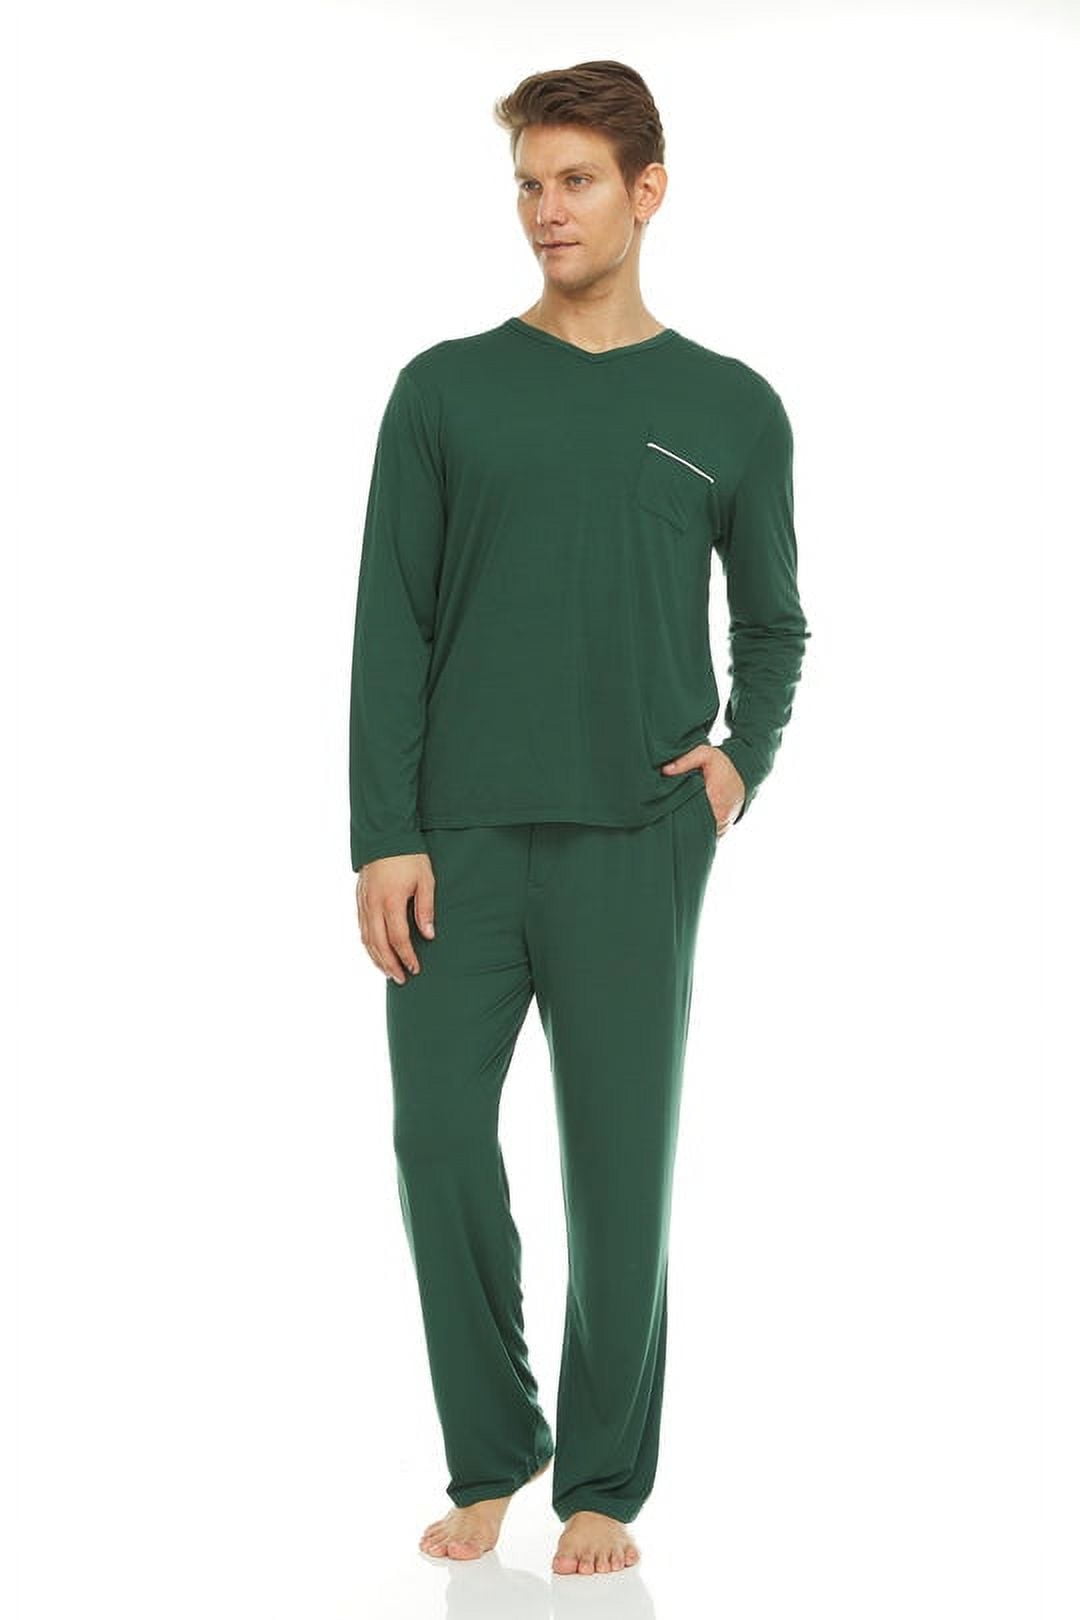 The most comfortable pajamas for men